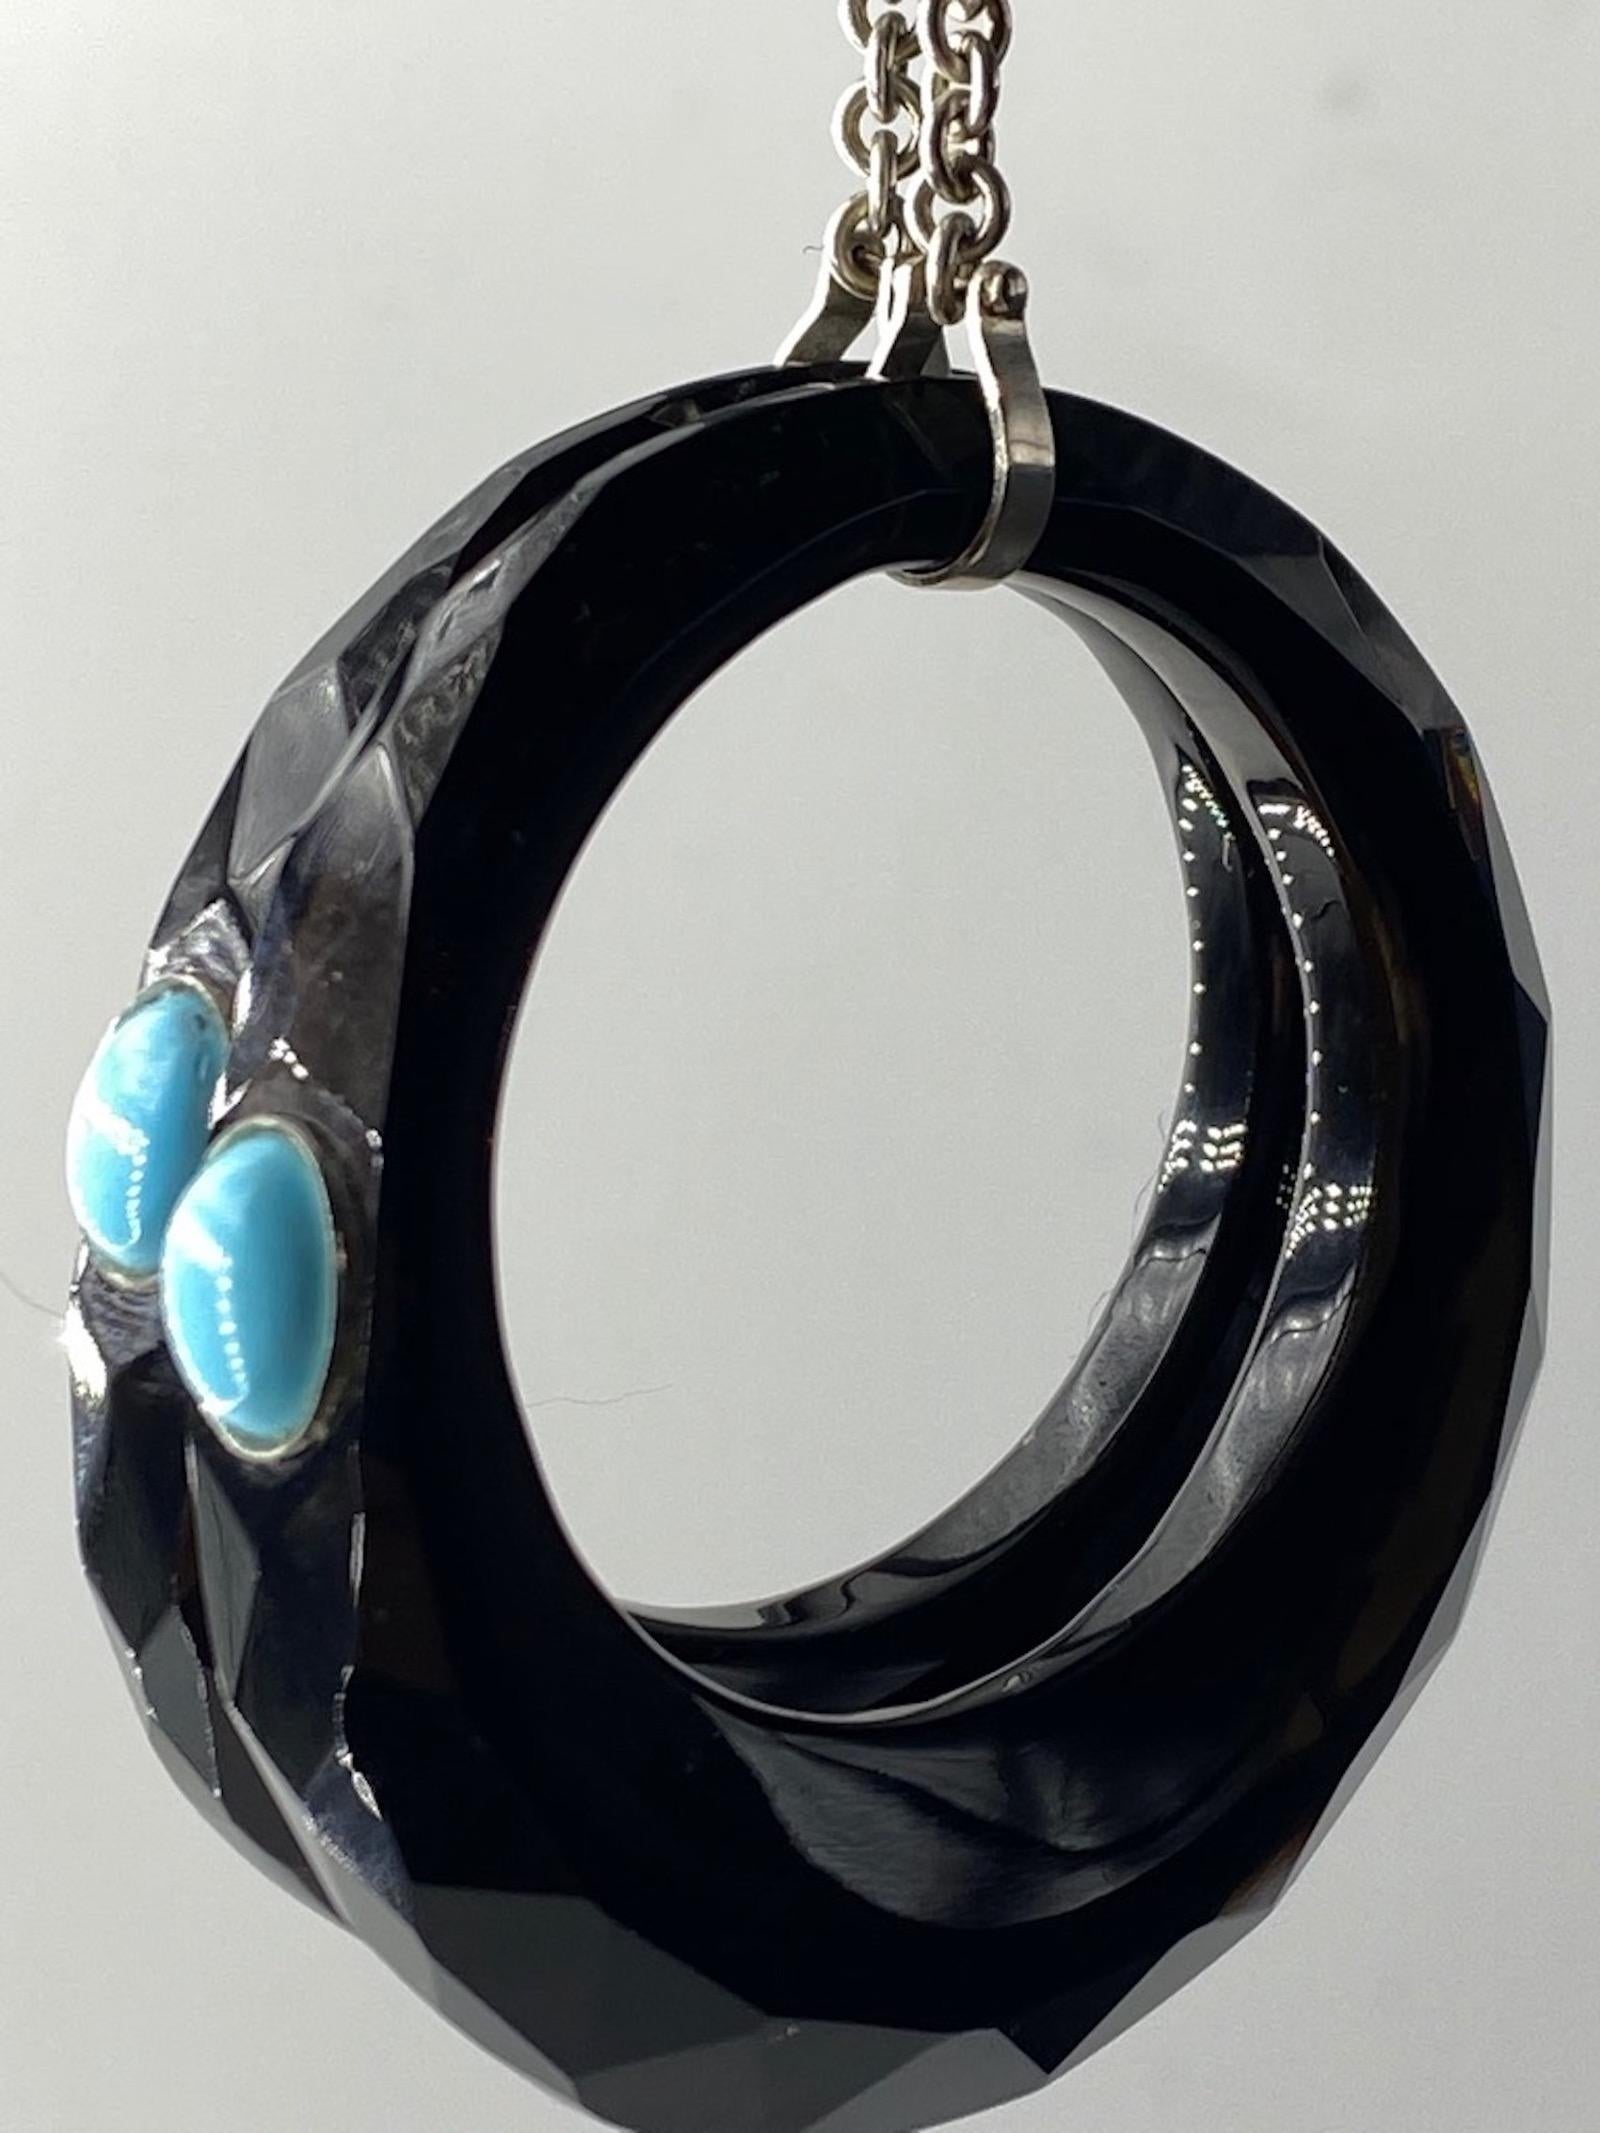 Eye catching Black Onyx earrings with Turquoise designed by Merideth McGregor of 
April in Paris Designs. Black onyx is one of the most intriguing stones you’ll ever come across. For thousands of years onyx has been used as a source of protection